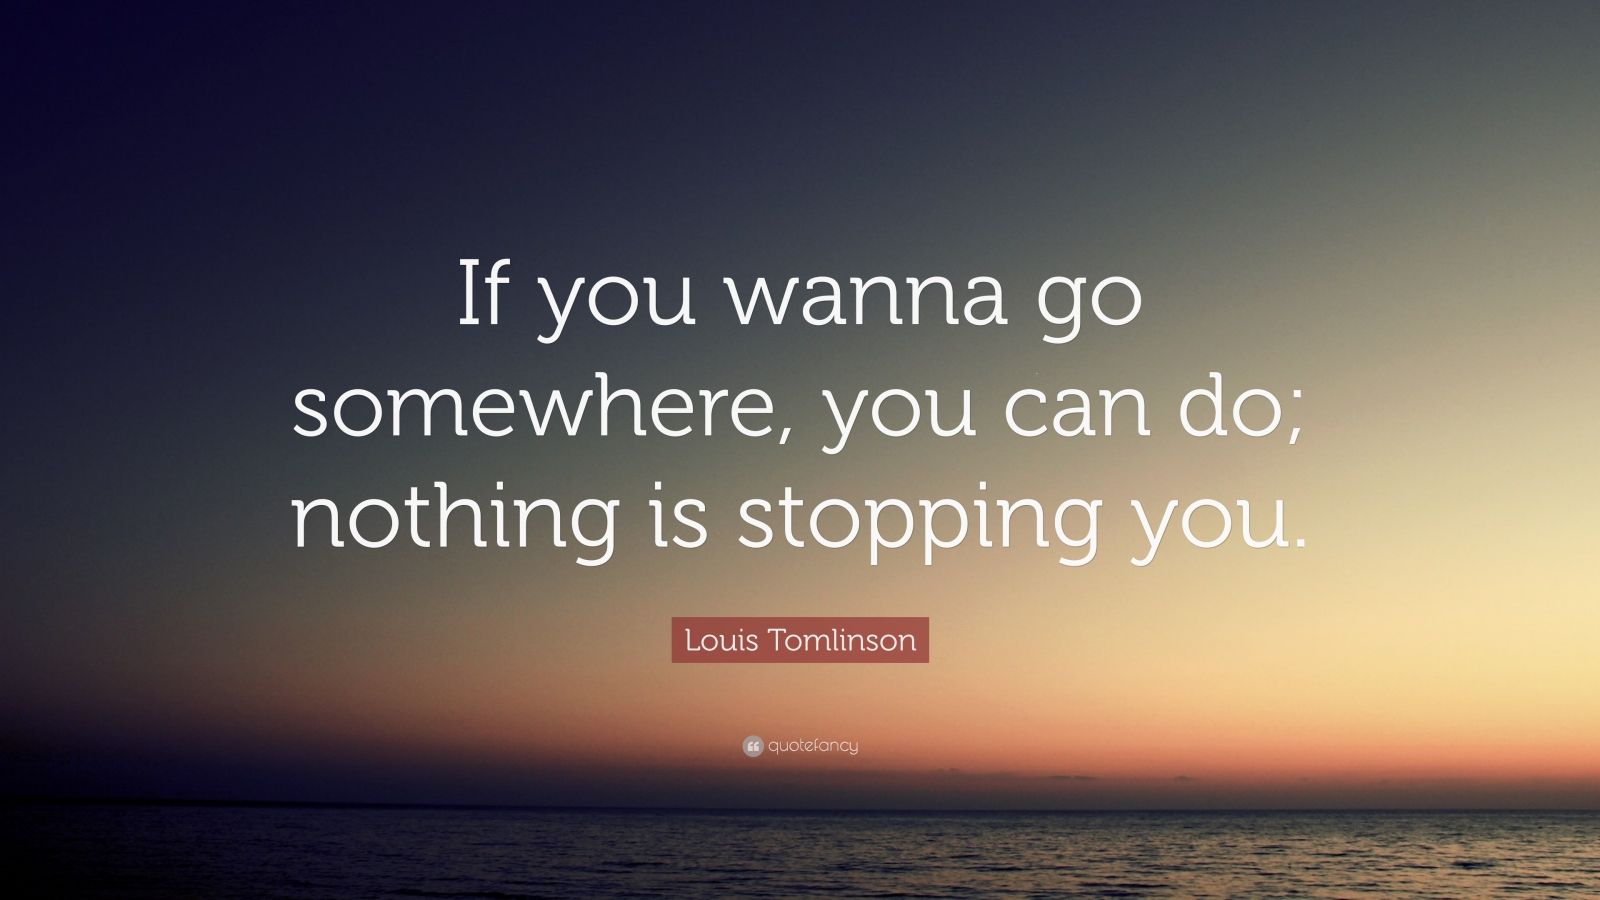 Louis Tomlinson Quote: “If you wanna go somewhere, you can do; nothing is stopping you.” (7 ...